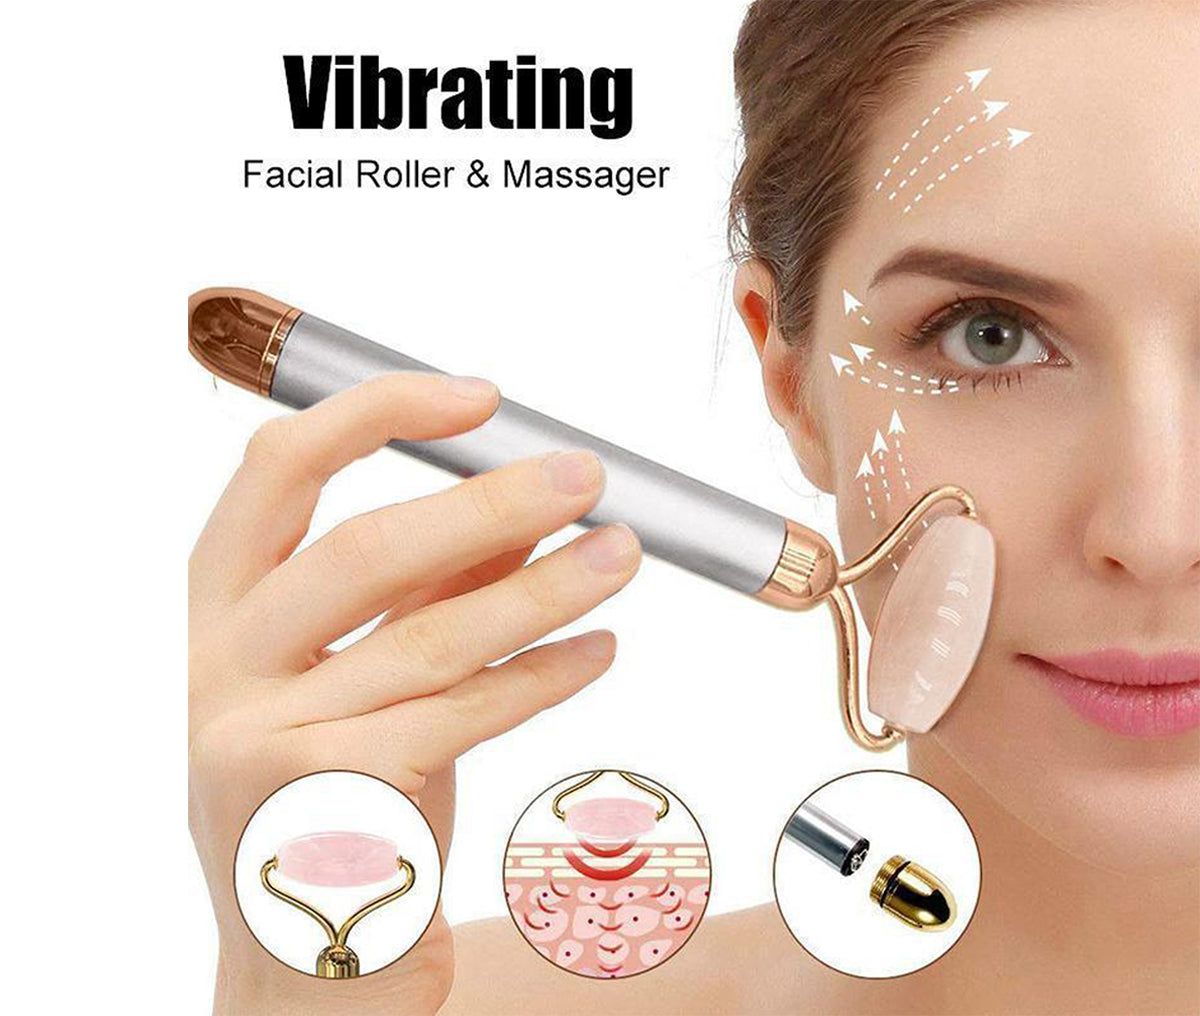 Flawless Contour Rose Quartz Facial Roller and Massager - Reduce Fine Lines, Wrinkles, Puffiness, and Dark Circles